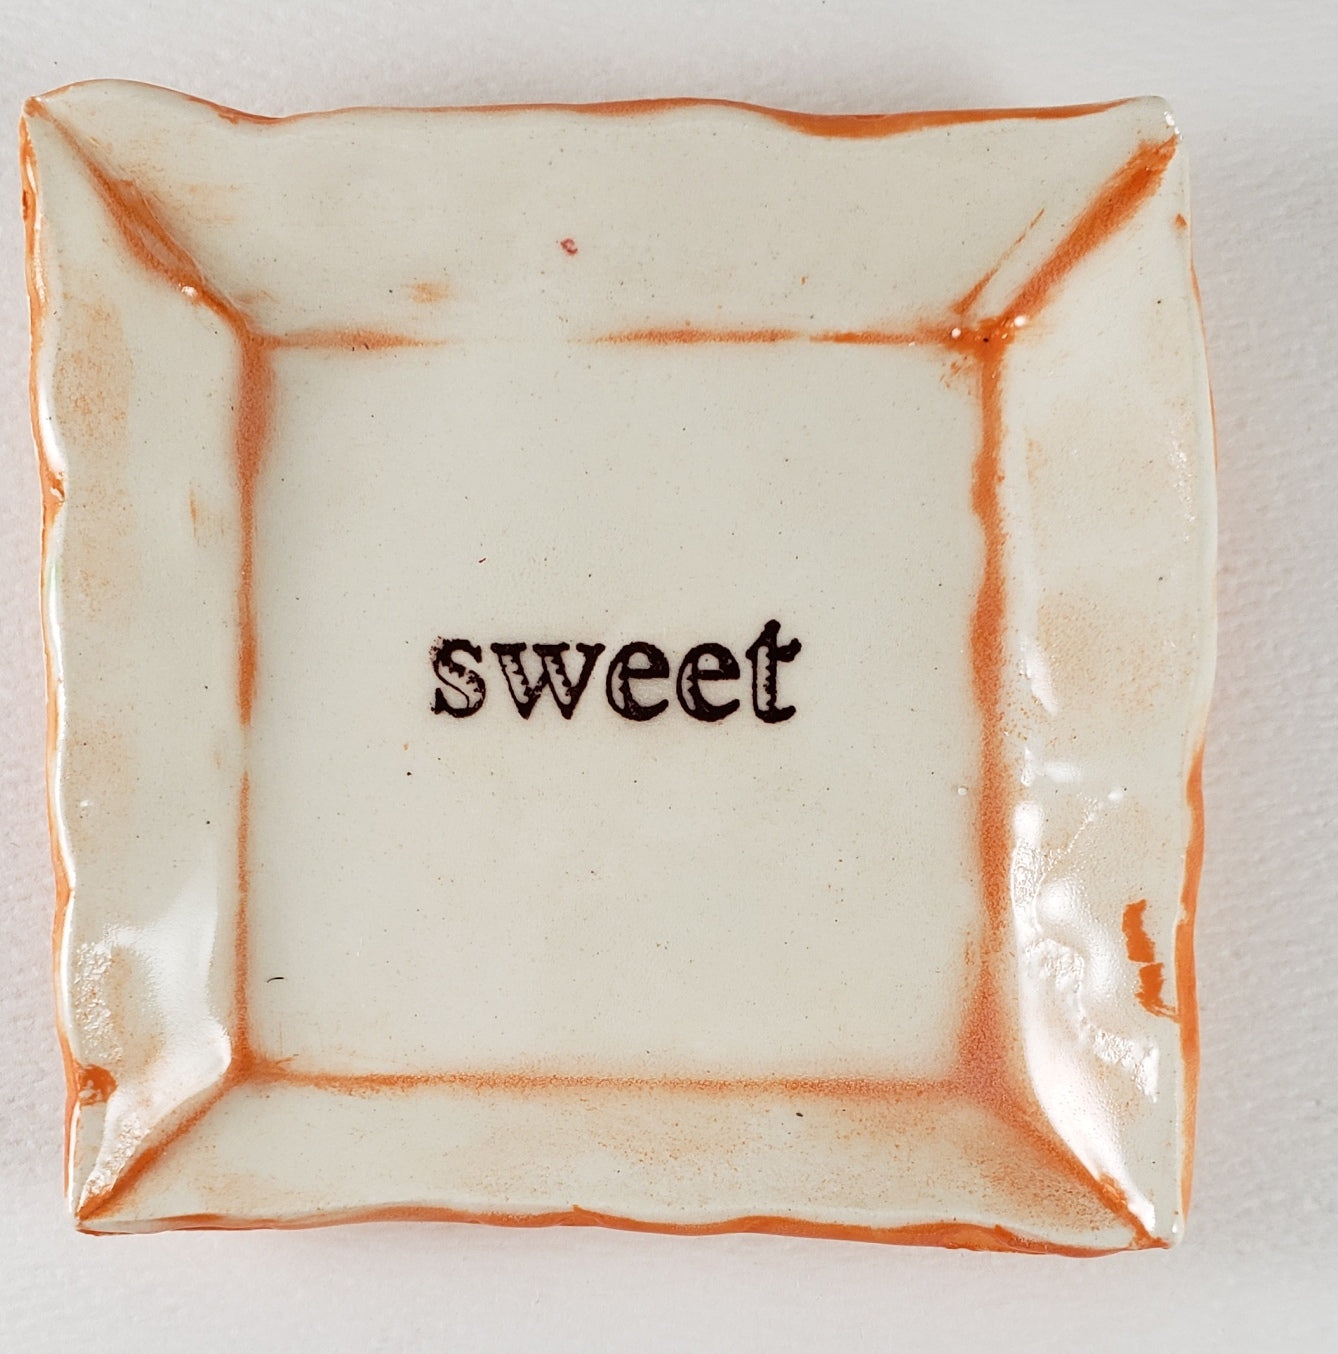 Tiny Plate with "Sweet"